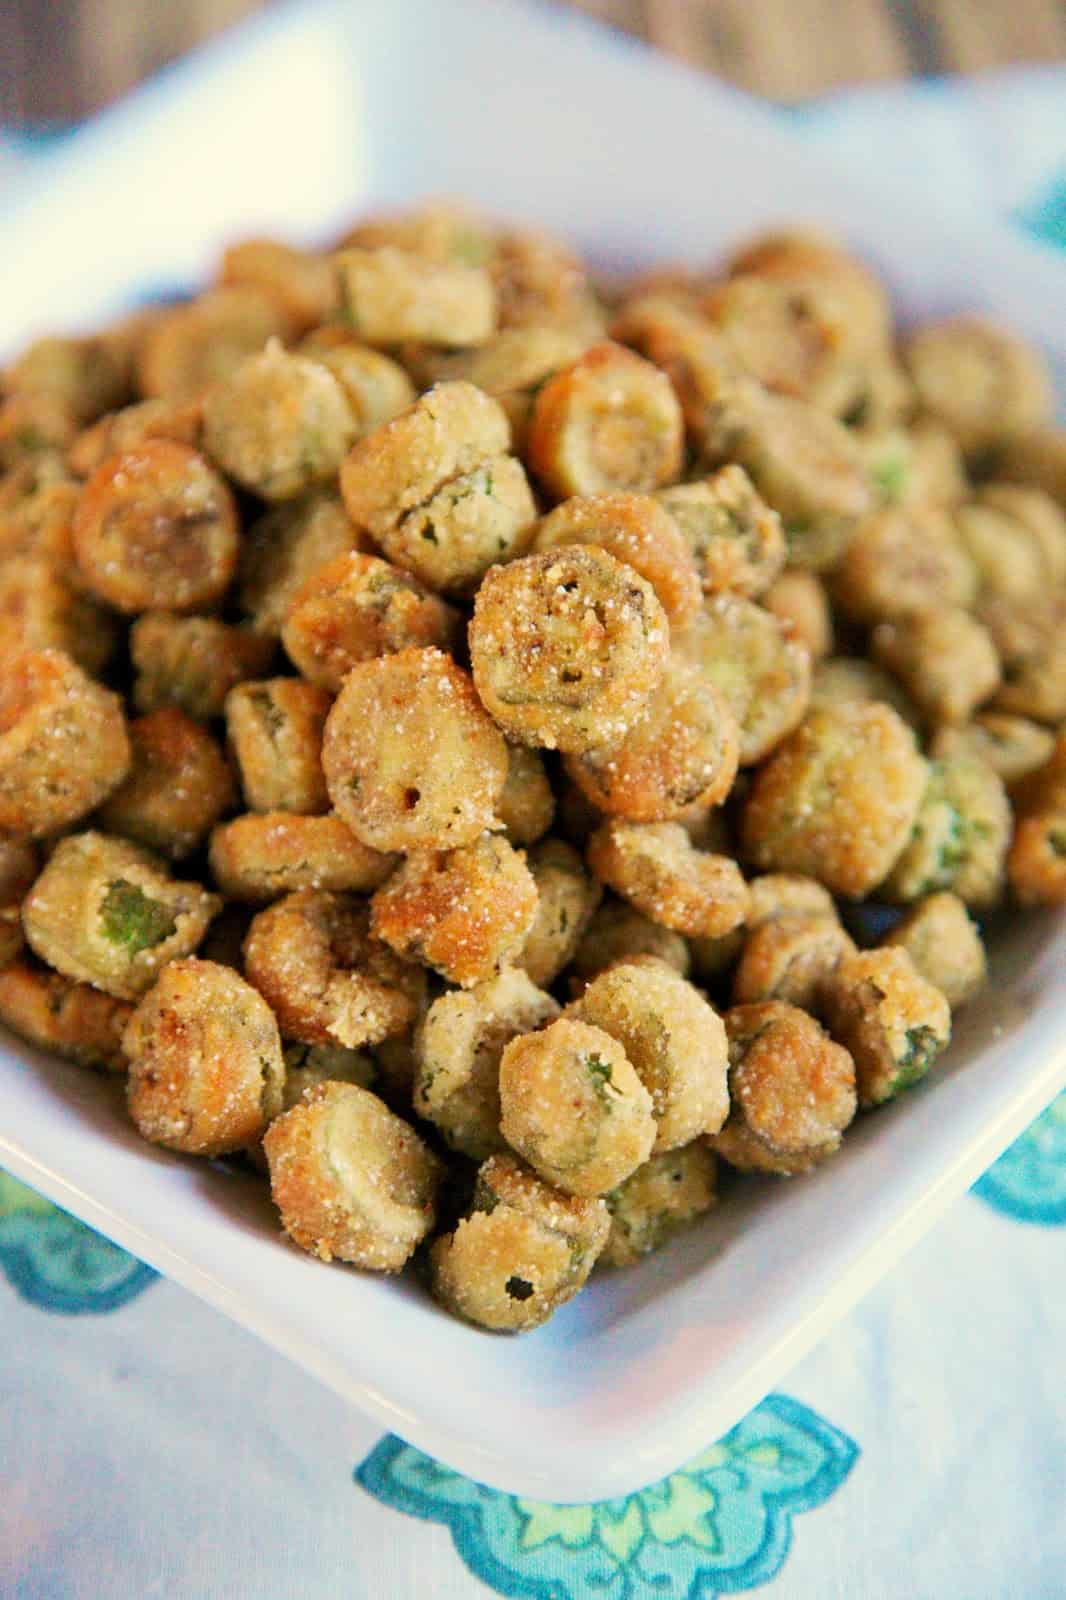 2-Ingredient Fried Okra - my favorite vegetable! SO good. I can eat the whole batch of this yummy, crunchy okra. My absolute fav!